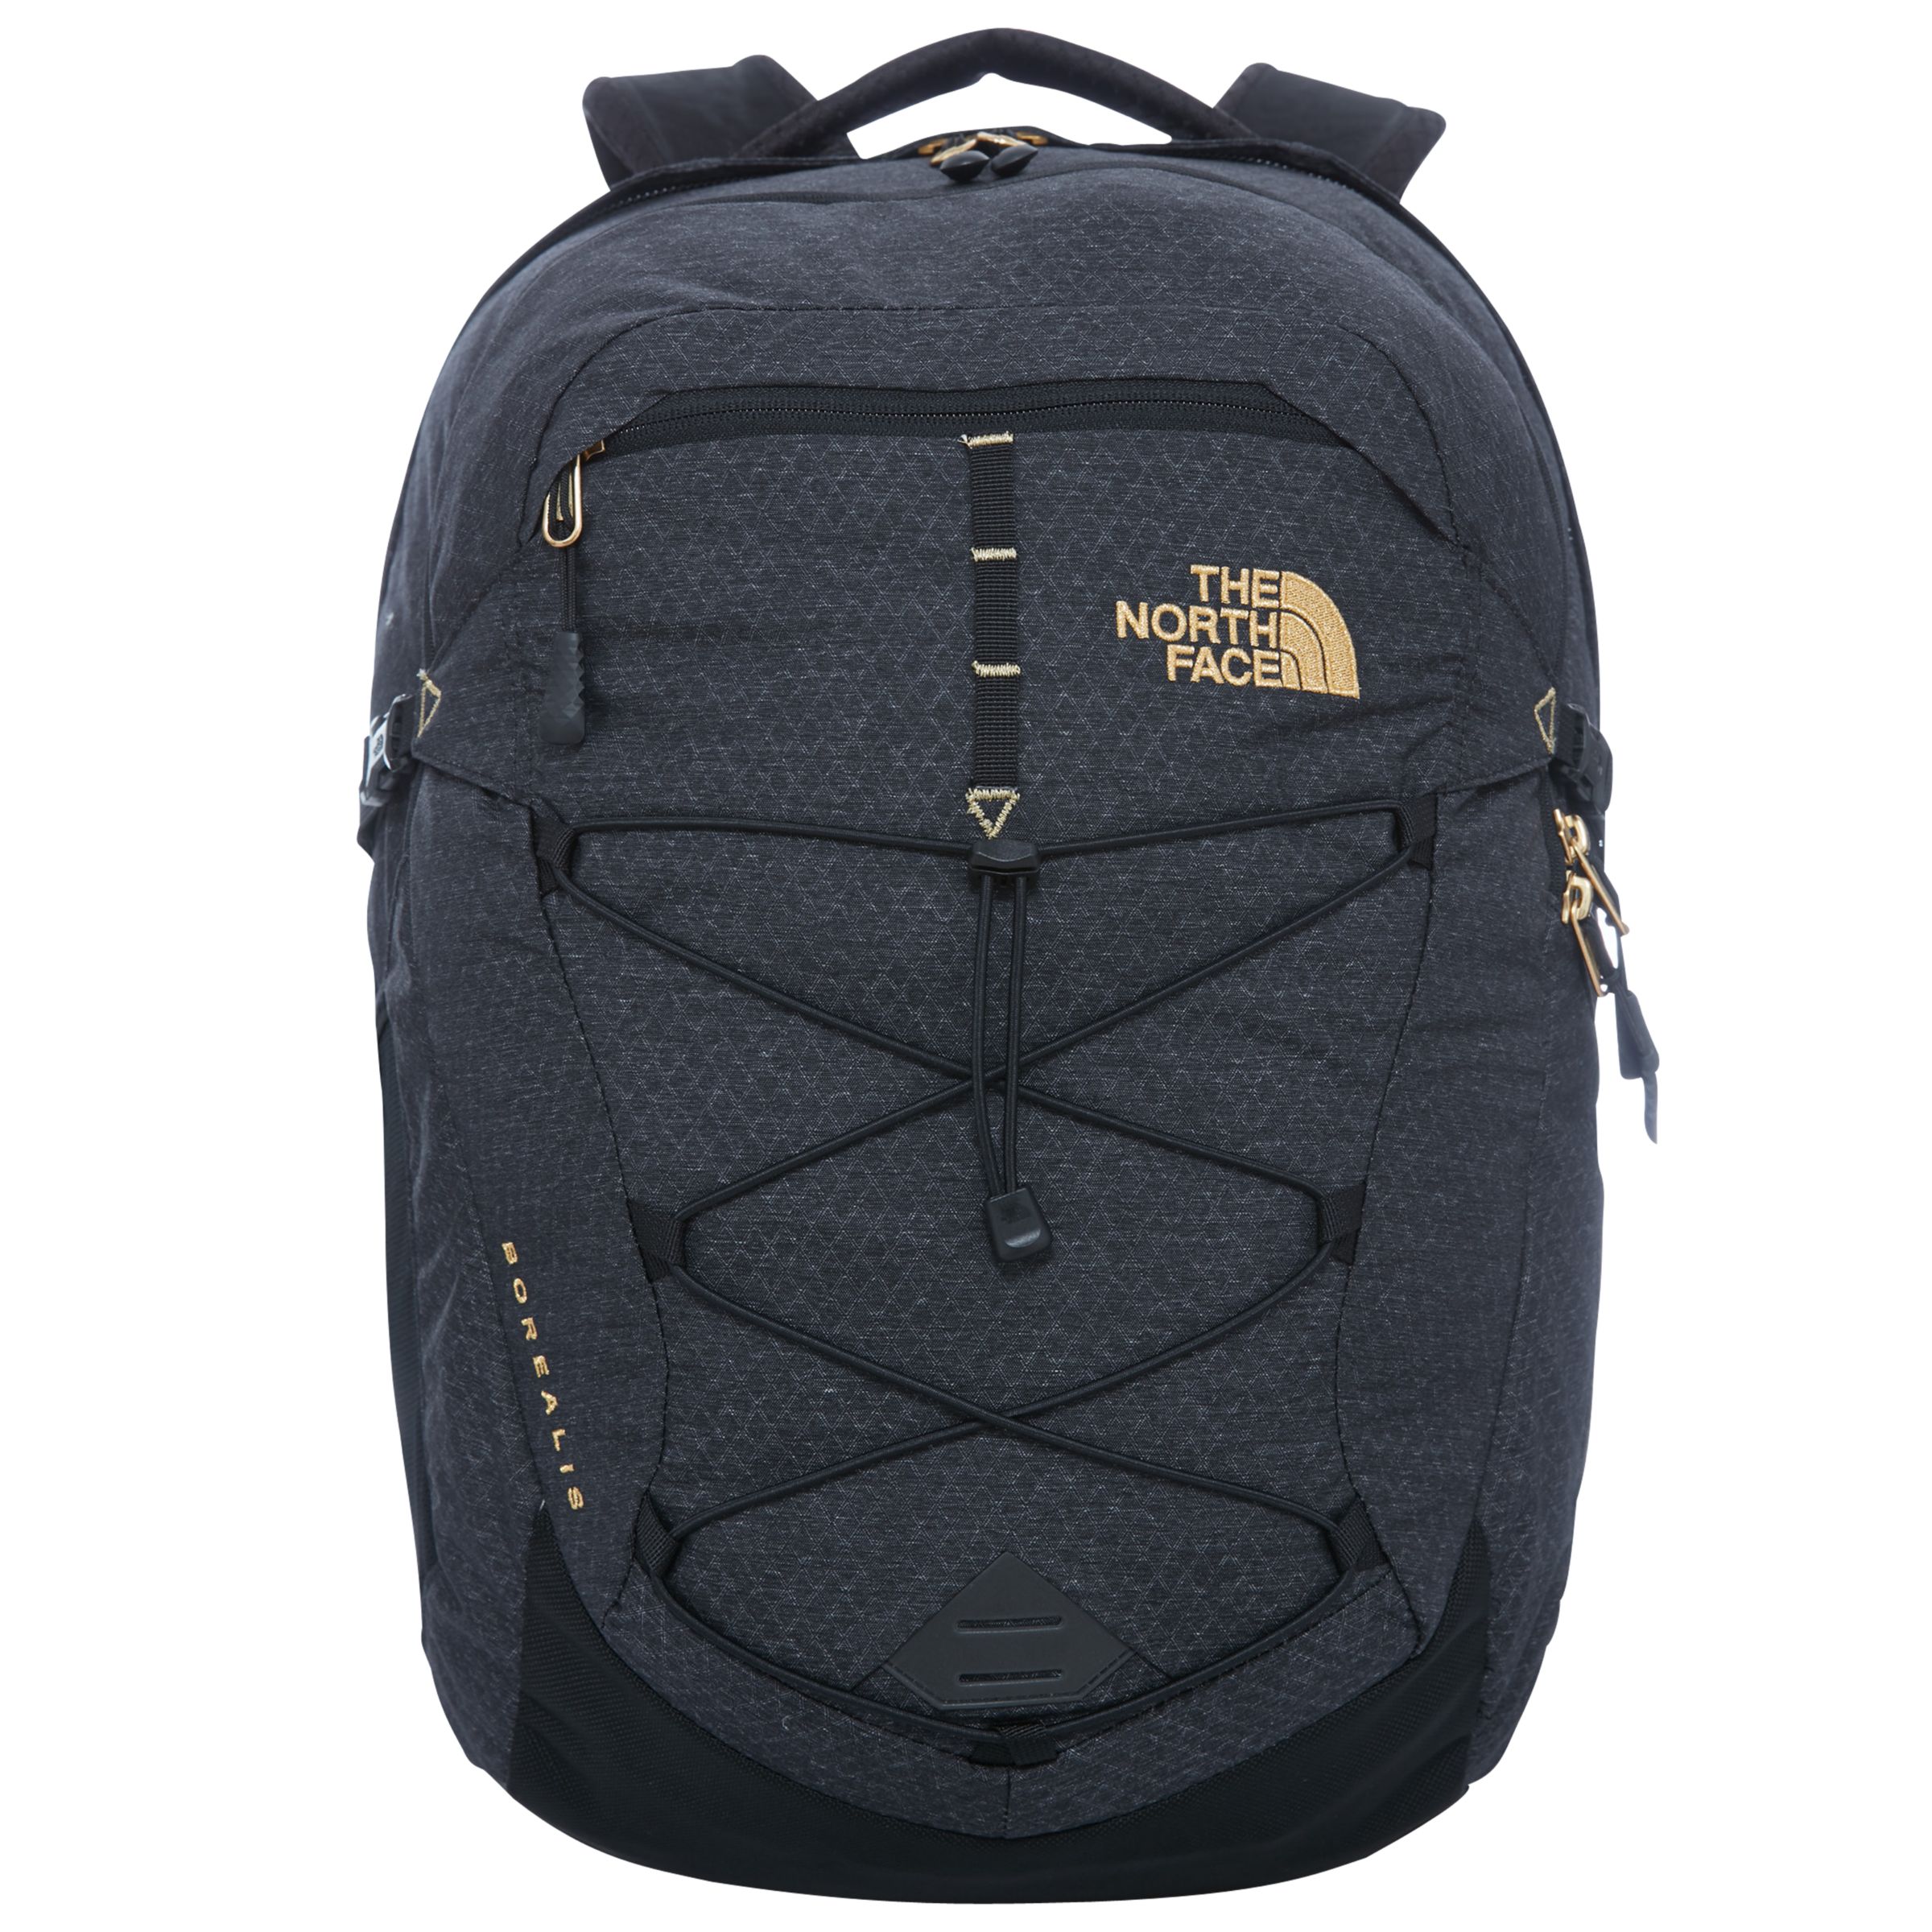 The North Face Borealis Backpack, Black 